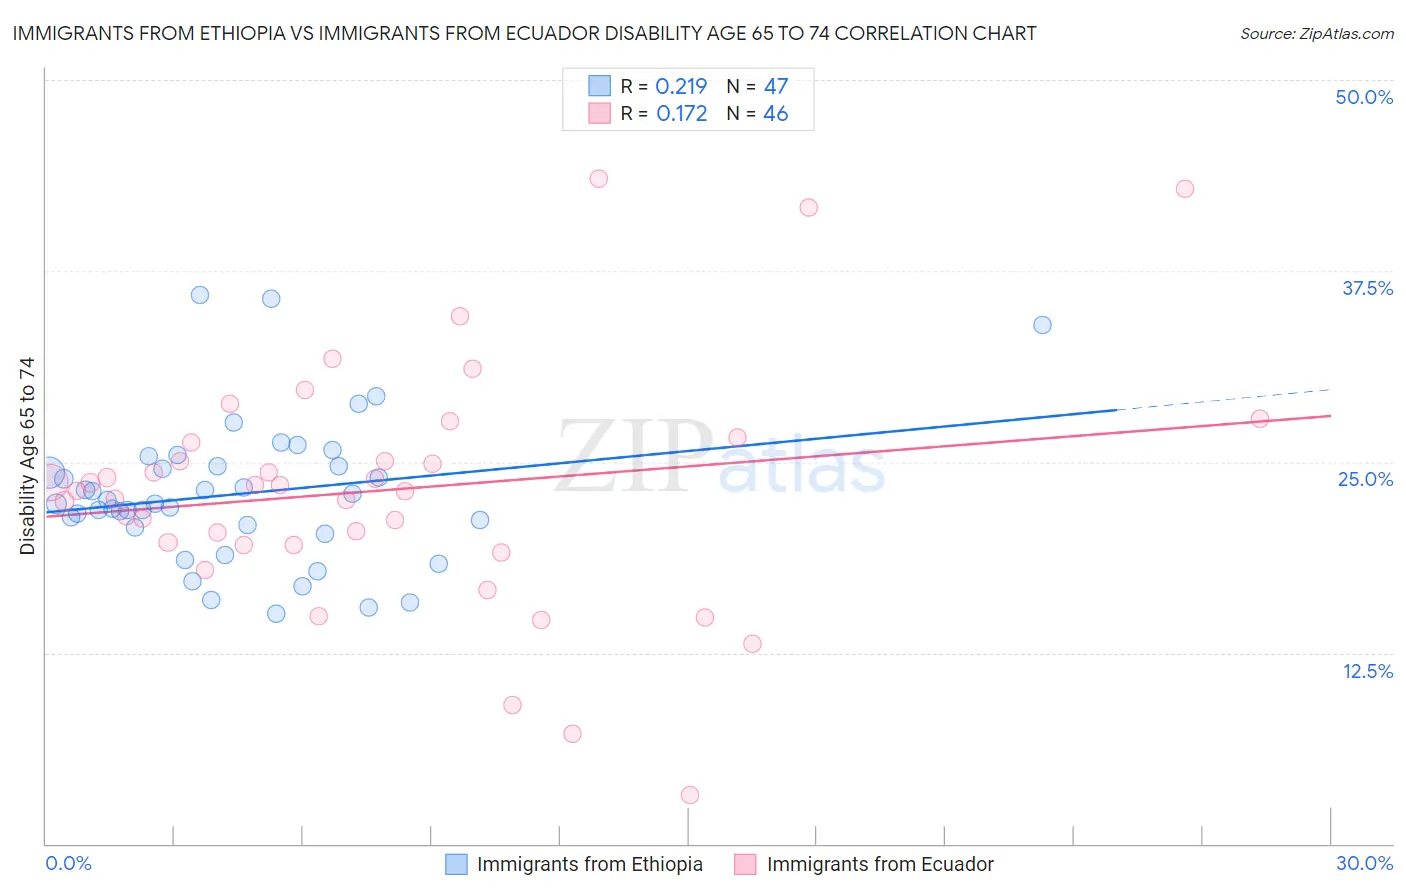 Immigrants from Ethiopia vs Immigrants from Ecuador Disability Age 65 to 74